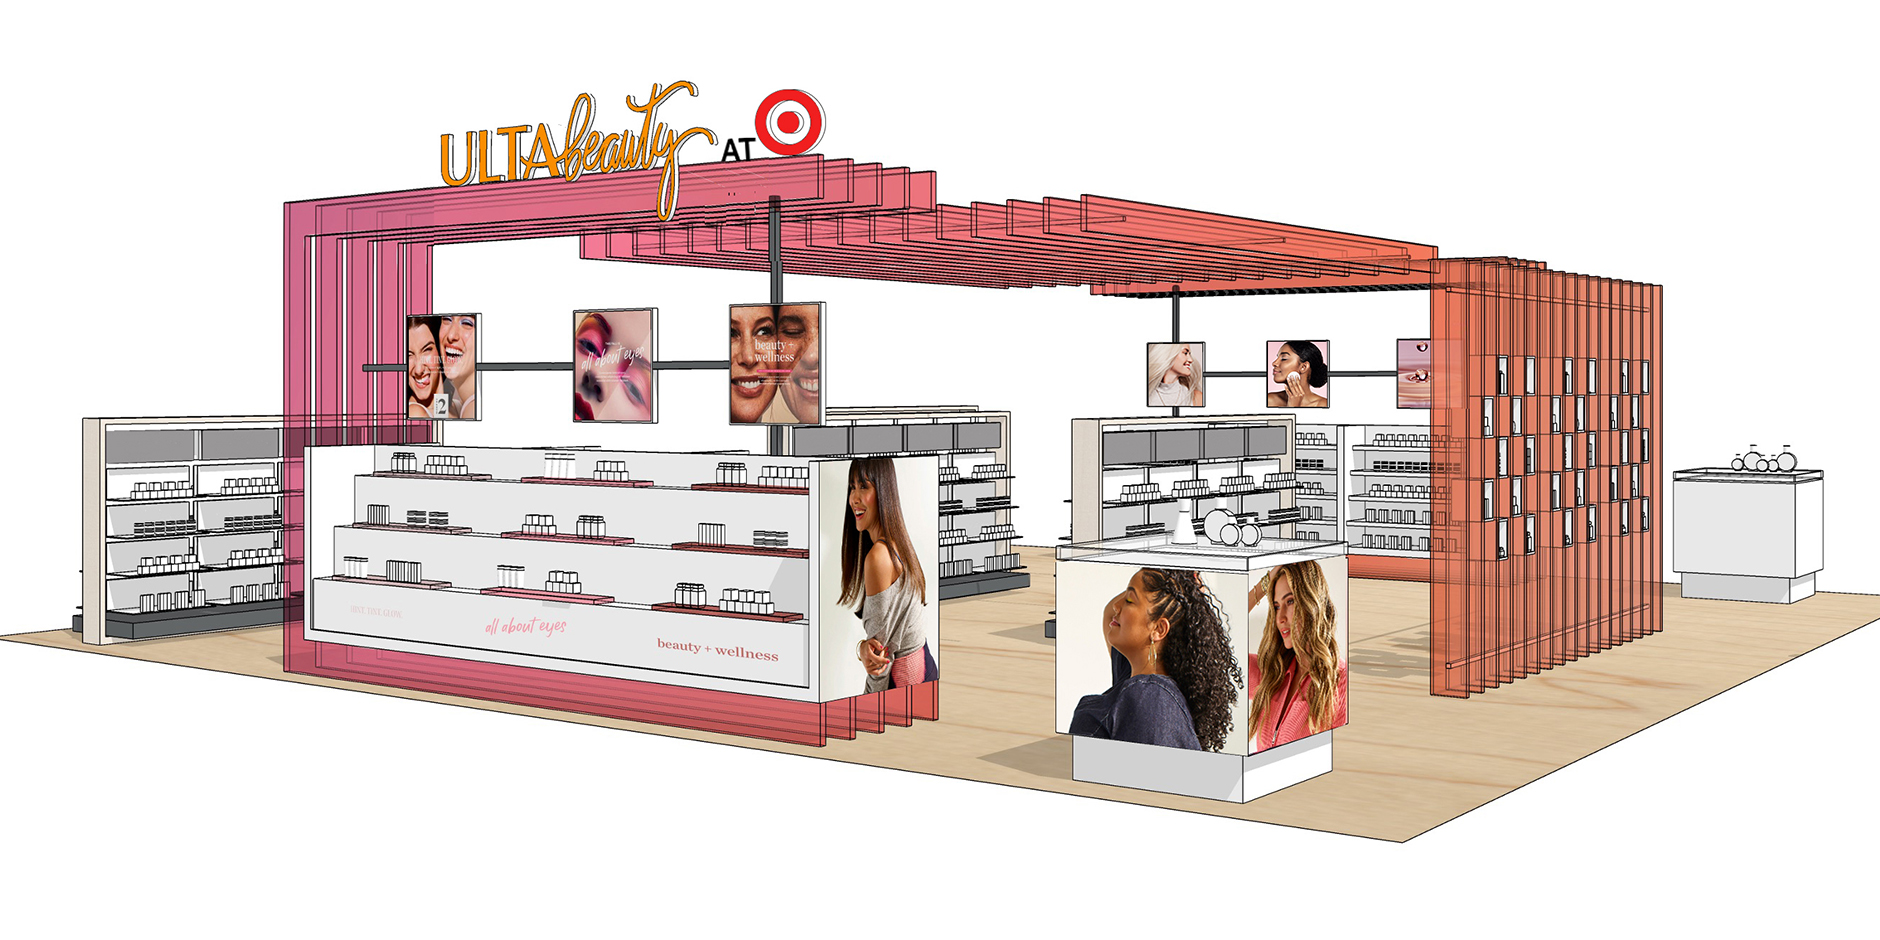 A rendering of the Ulta Beauty at Target experience